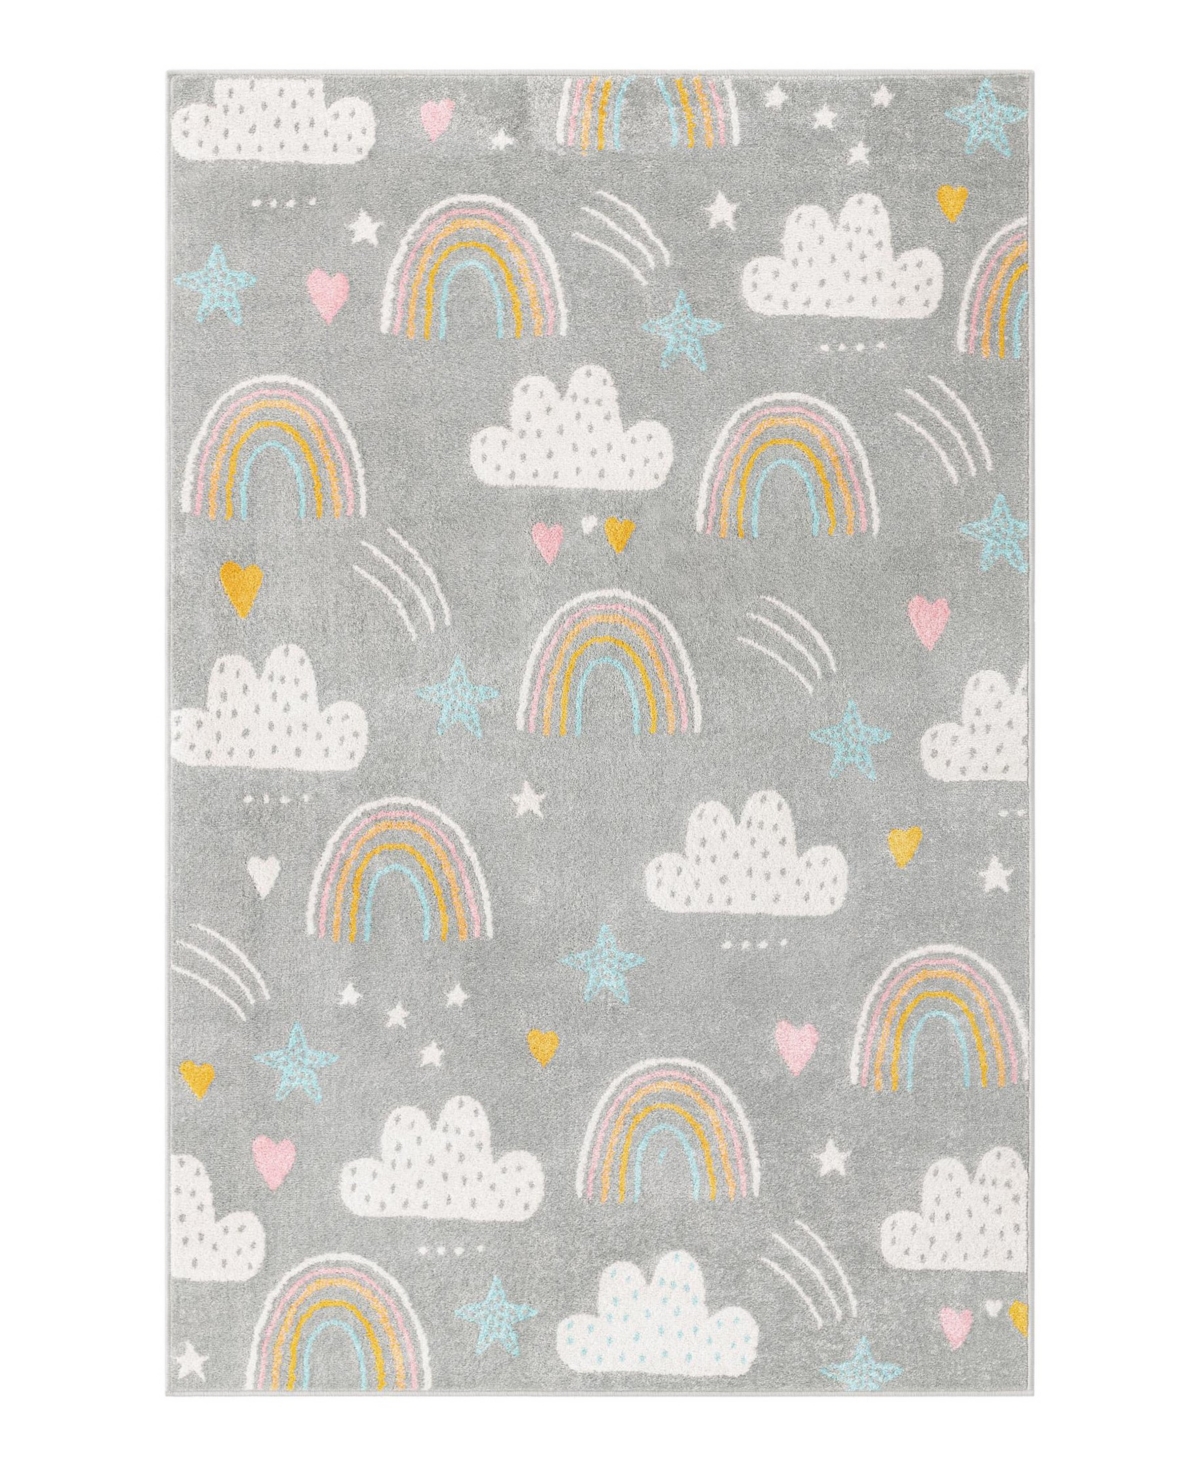 Bayshore Home Campy Kids Rainbow, Stars, And Clouds 5'3" X 8' Area Rug In Gray